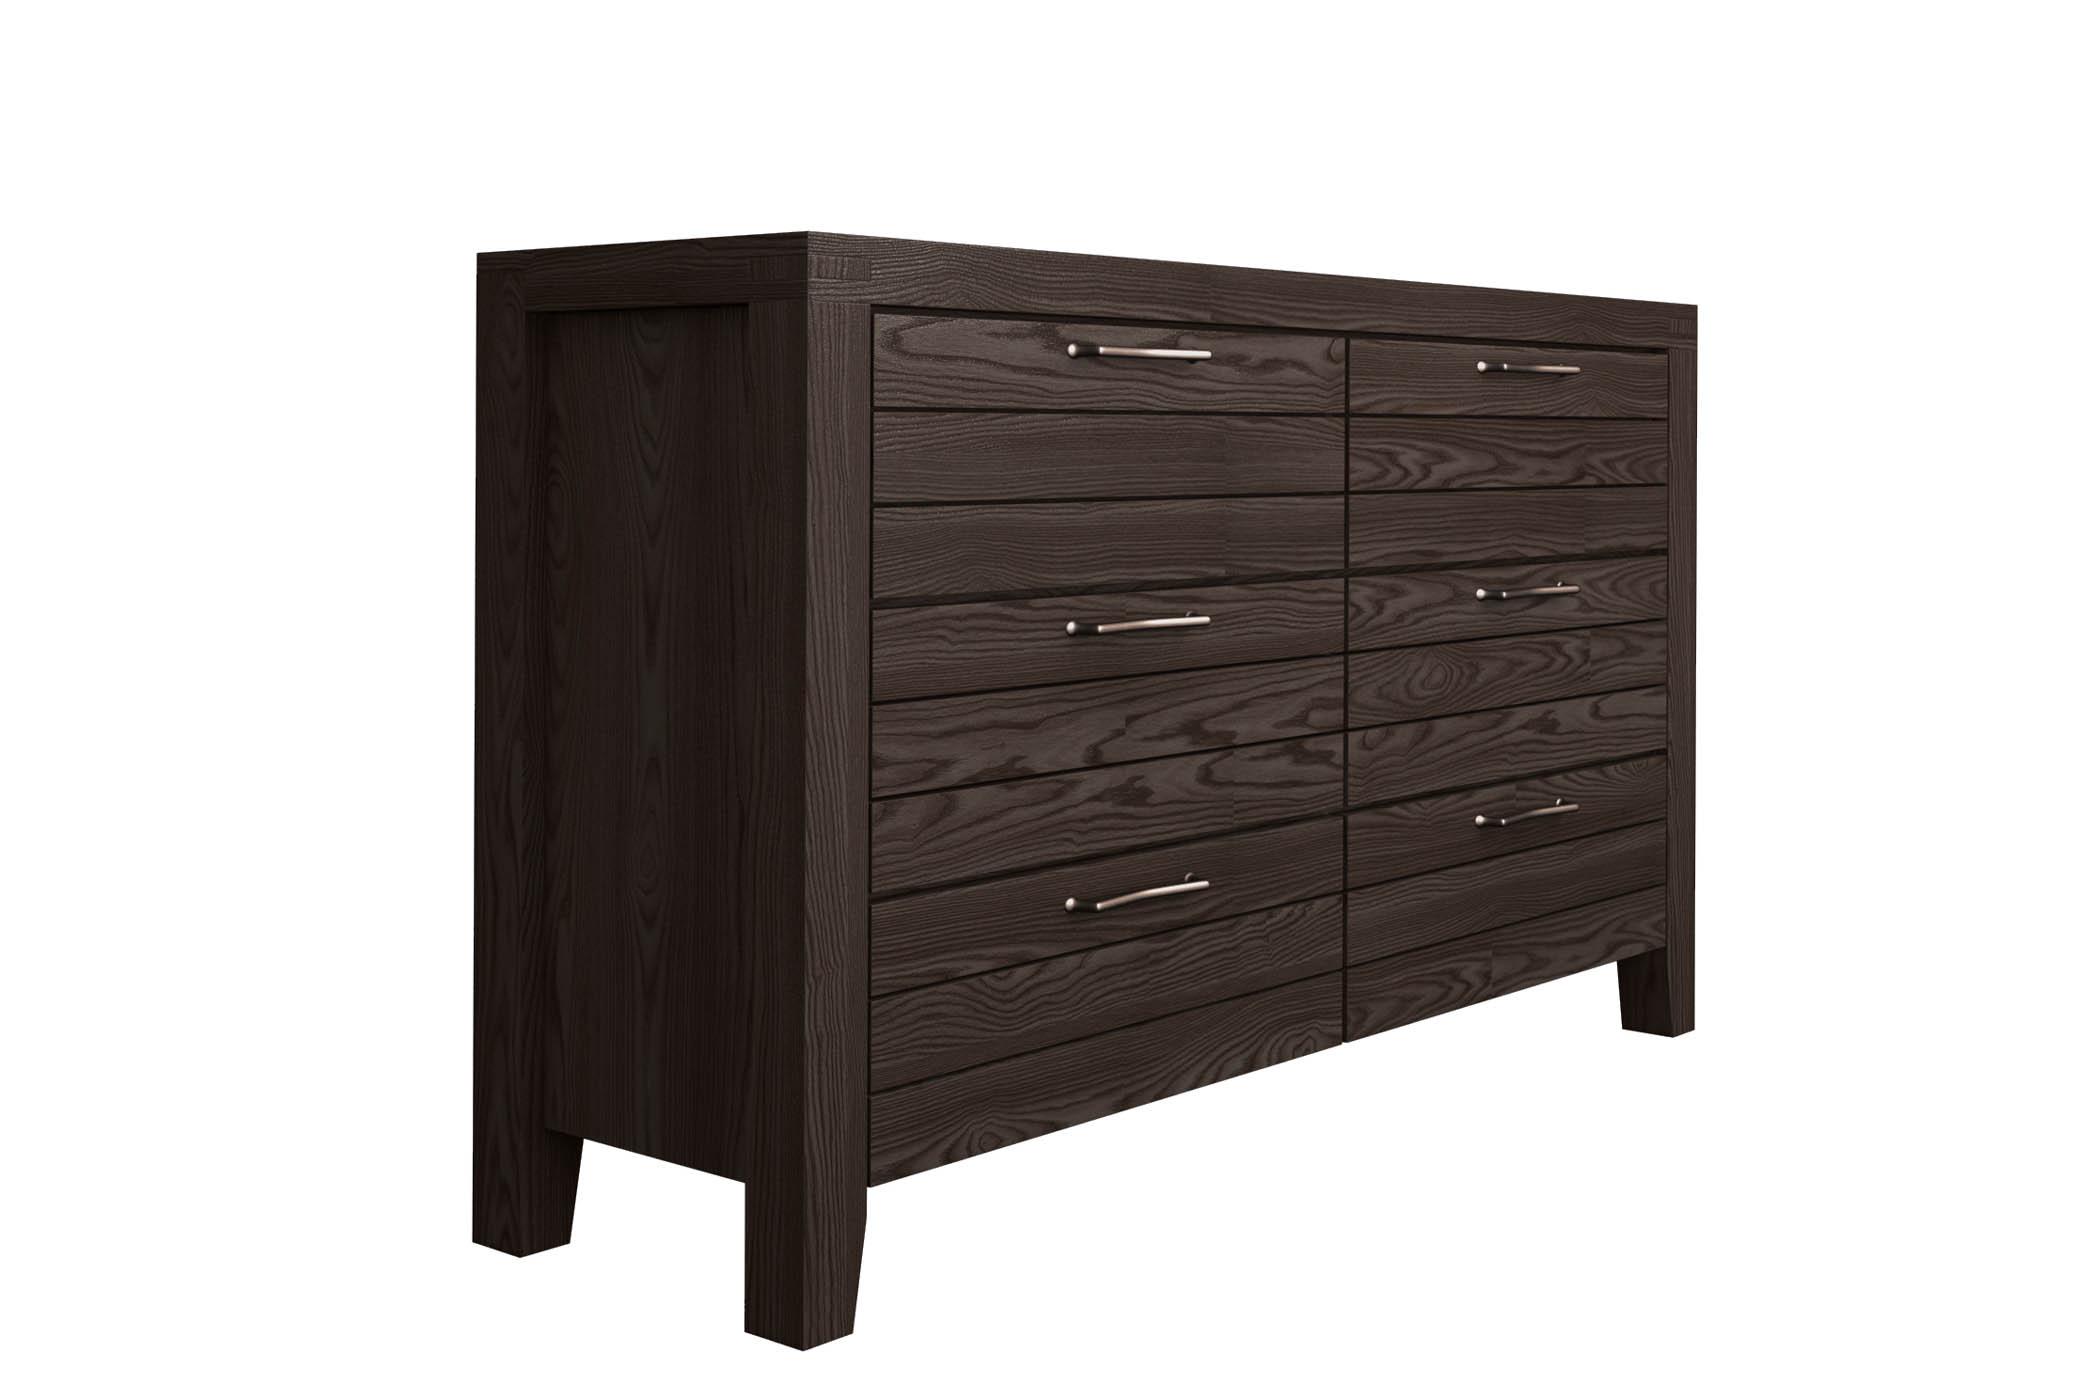 Contemporary, Traditional Dresser CRESTWOOD 1465-130 1465-130 in Auburn, Brown 